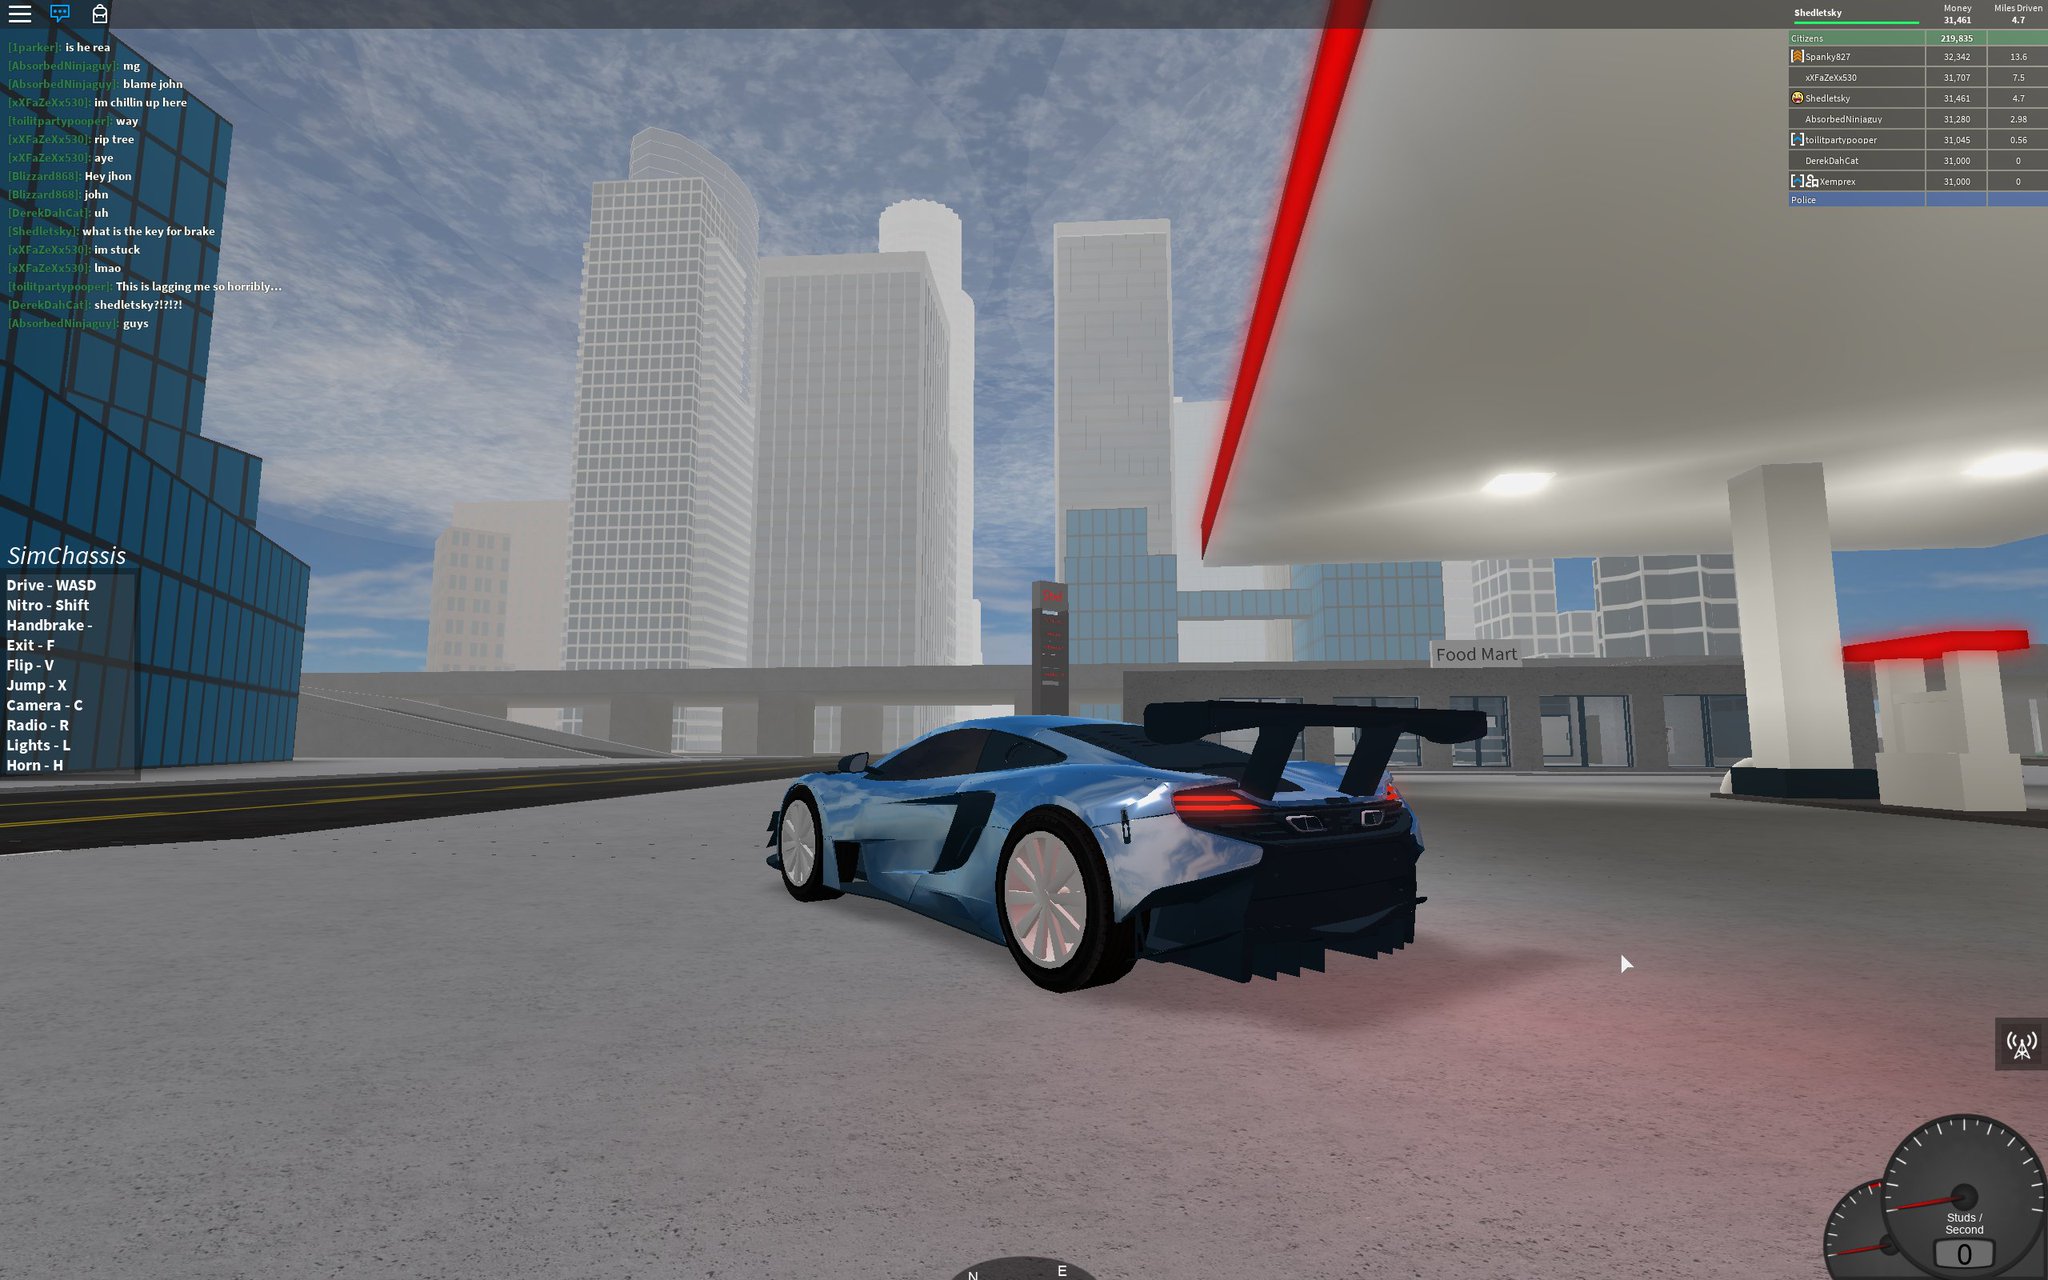 John Shedletsky And 3 154 054 Others On Twitter Roblox Now With Slightly Nicer Vehicles Than Minecraft Https T Co Fvhgezangm Created By Simbuilder - shedletsky roblox twitter